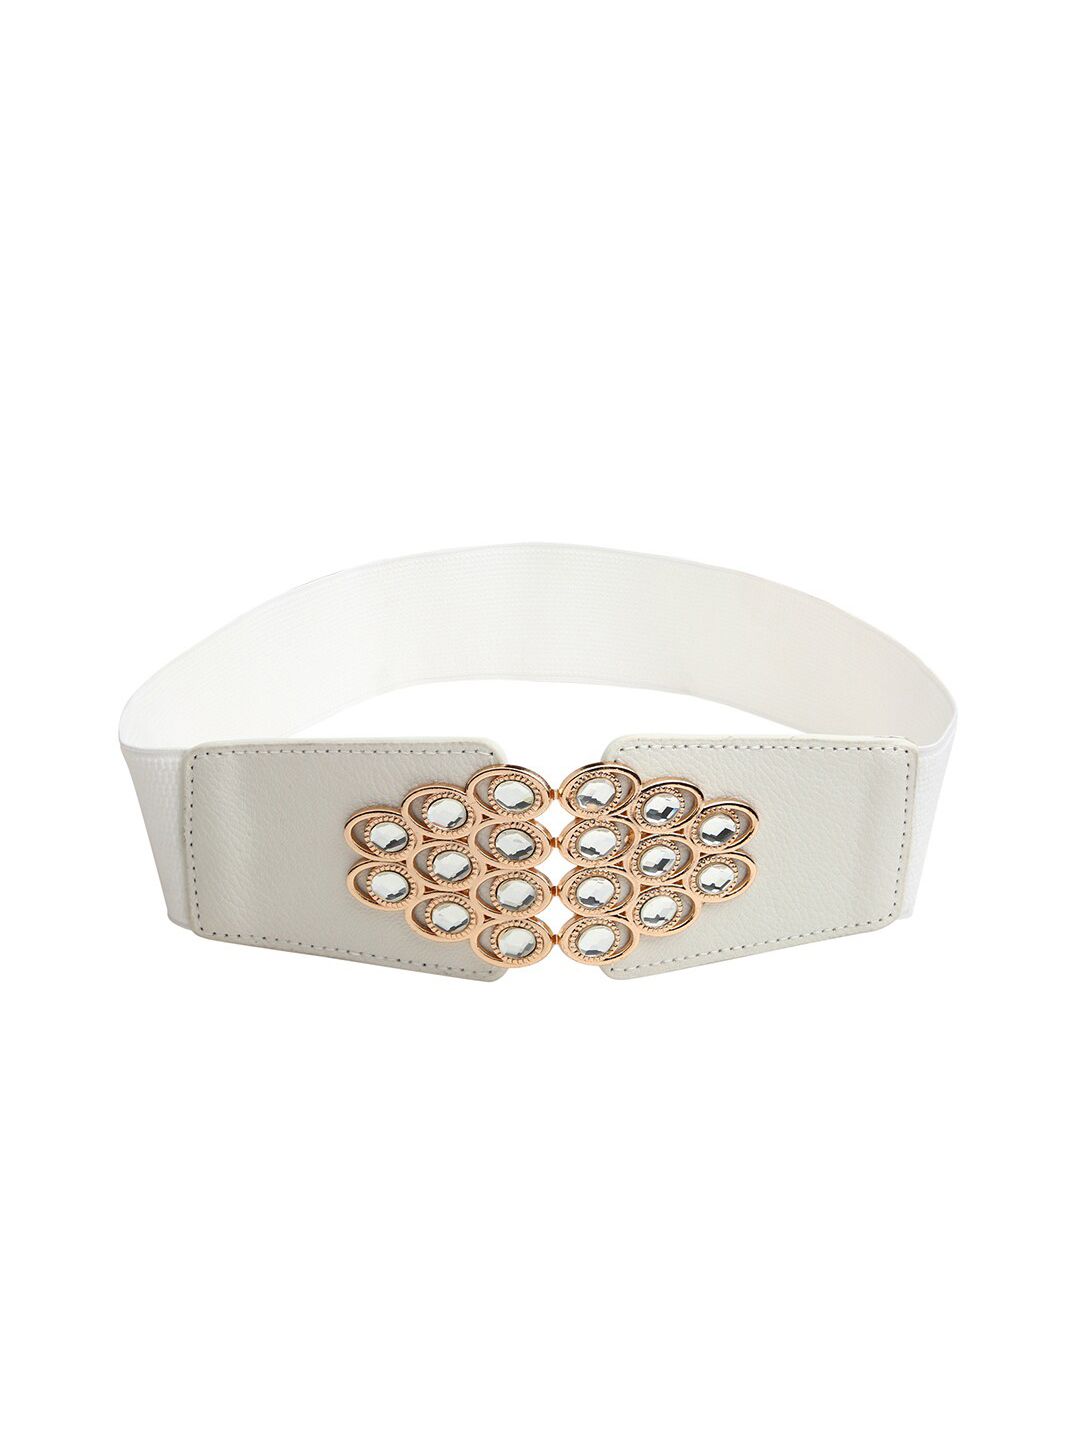 CRUSSET Women White Textured Belt with Embellished Closure Price in India